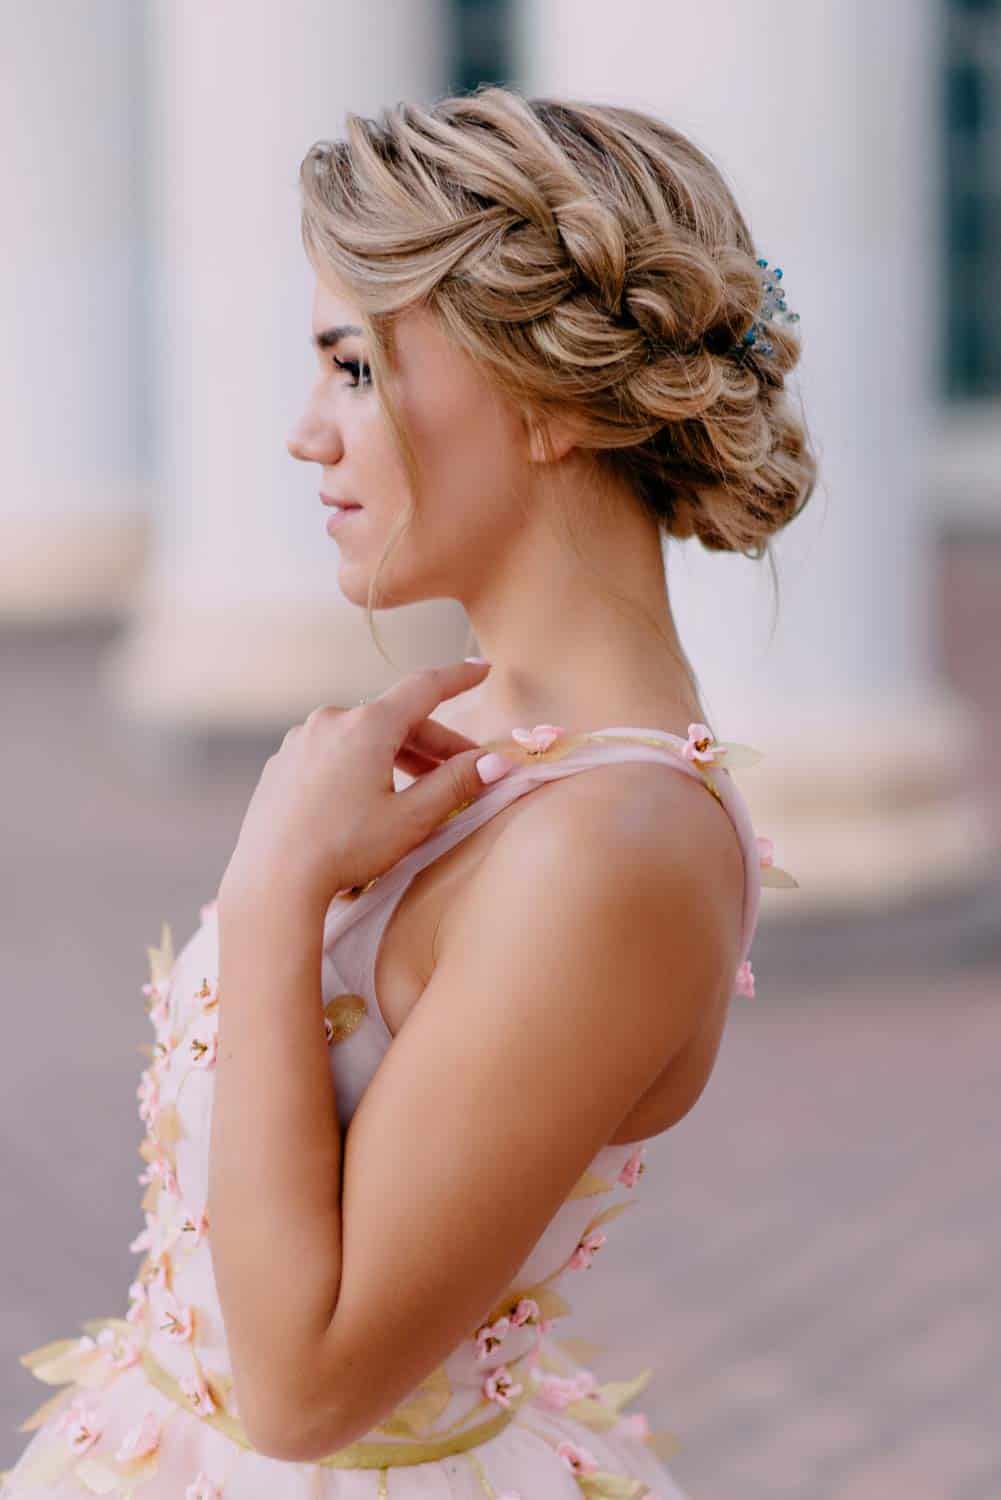 10 Wedding Hairstyle Ideas For Long Hair - Eluxe Magazine